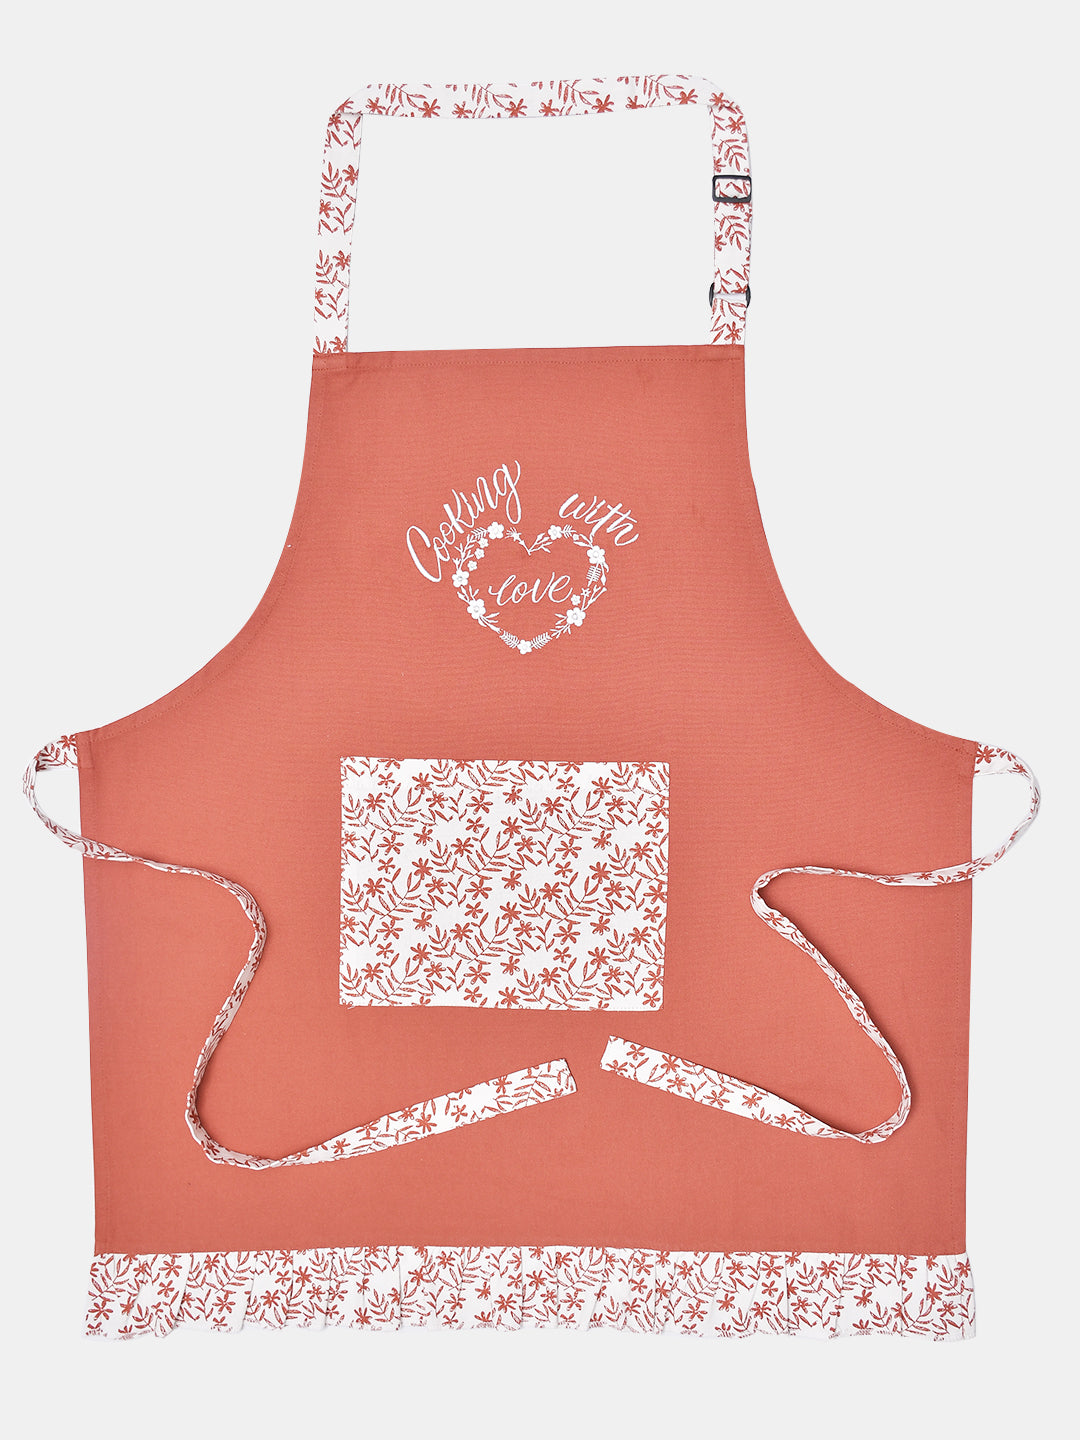 Blanc9 Cooking with Love Rusty Red Cotton Printed Apron